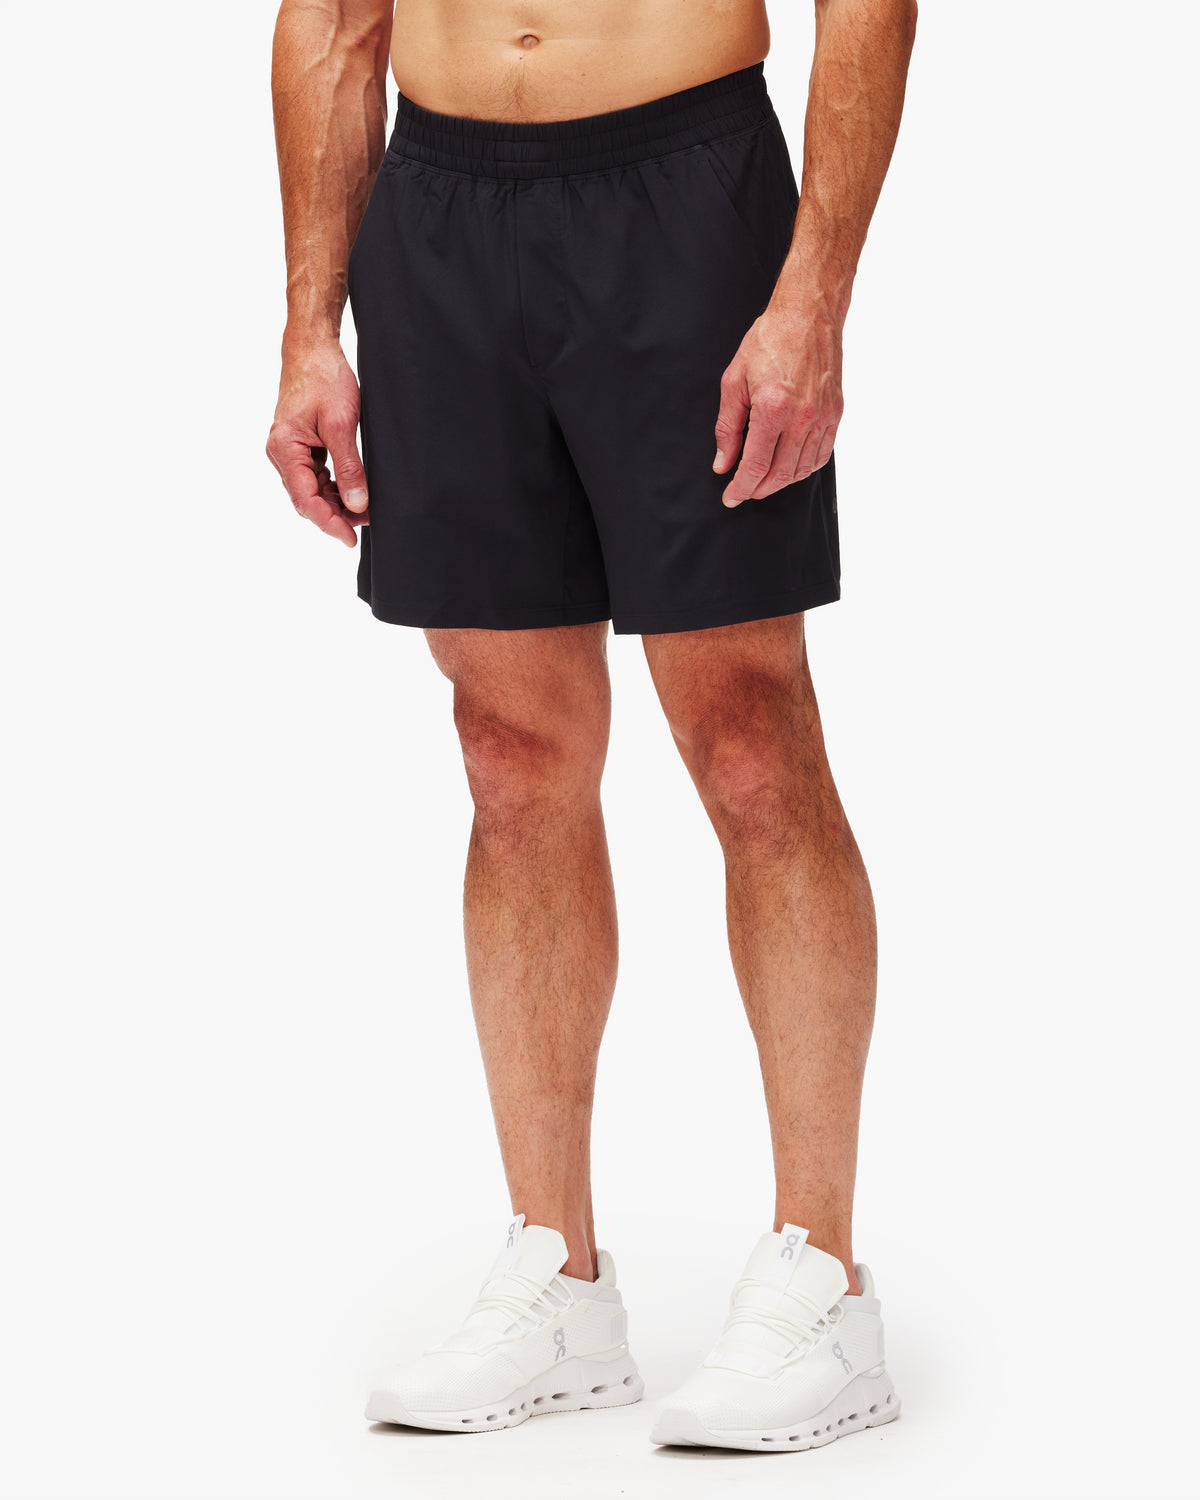 Lululemon Pace Breaker Short 5- Lined – The Shop at Equinox